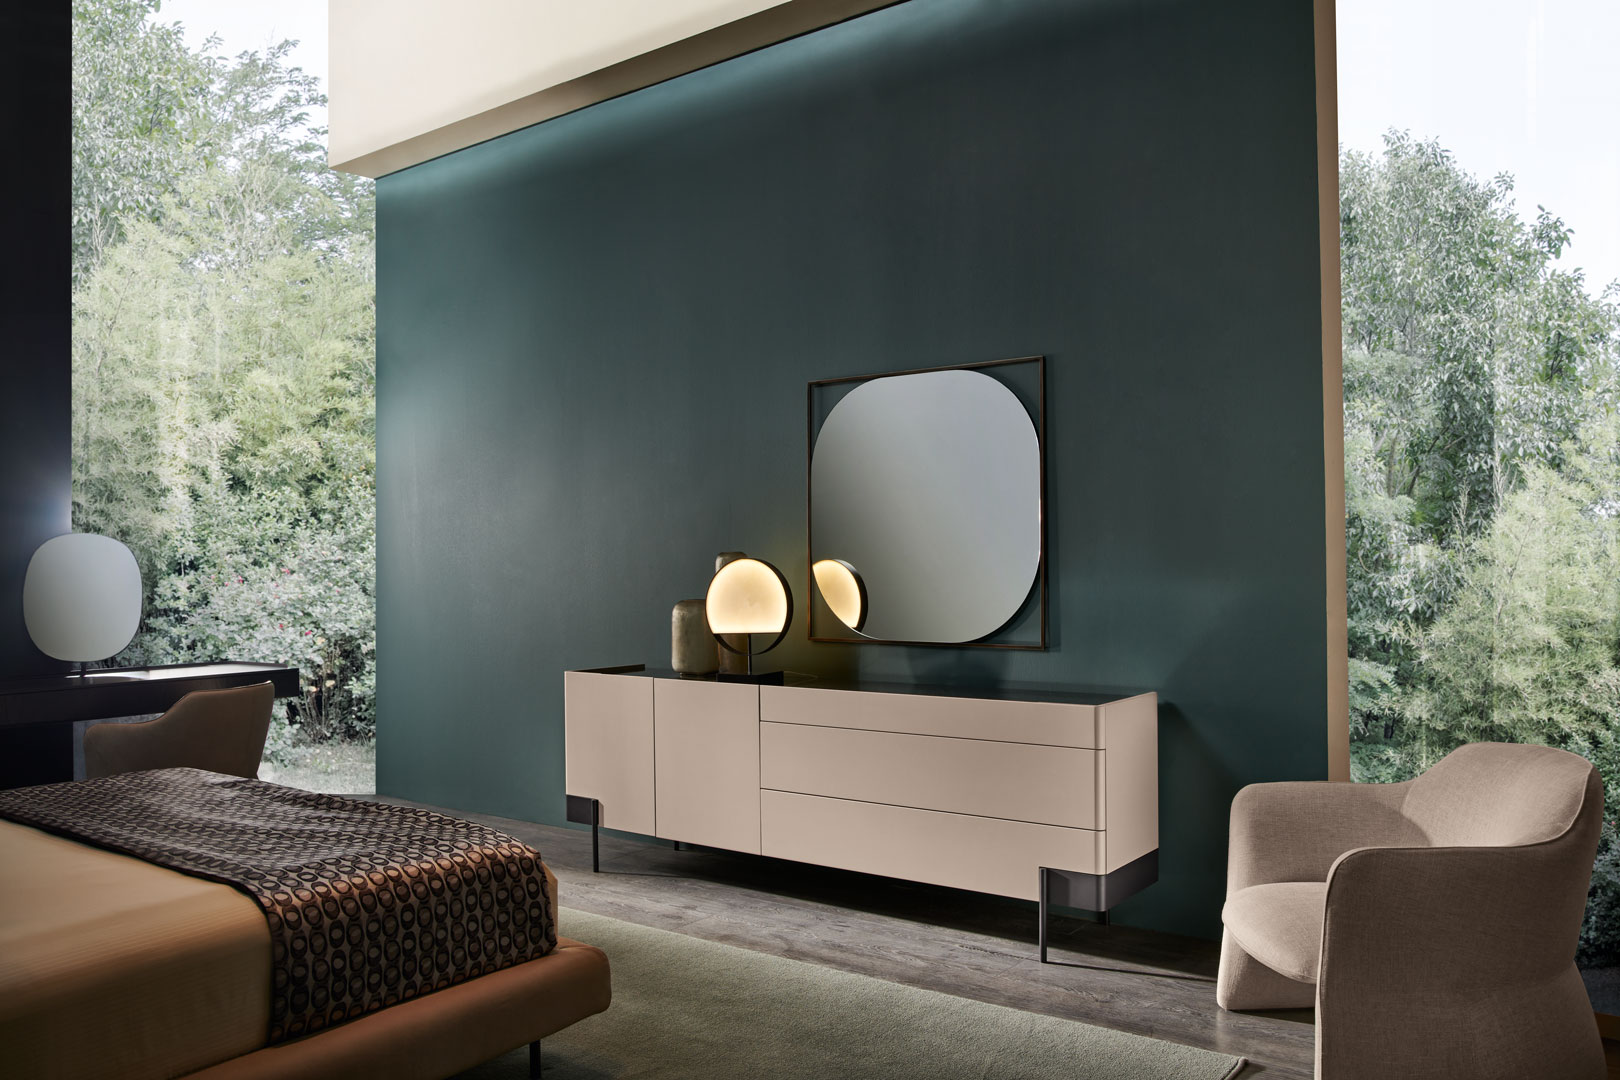 Valley sideboard for living and bedroom - Cantori